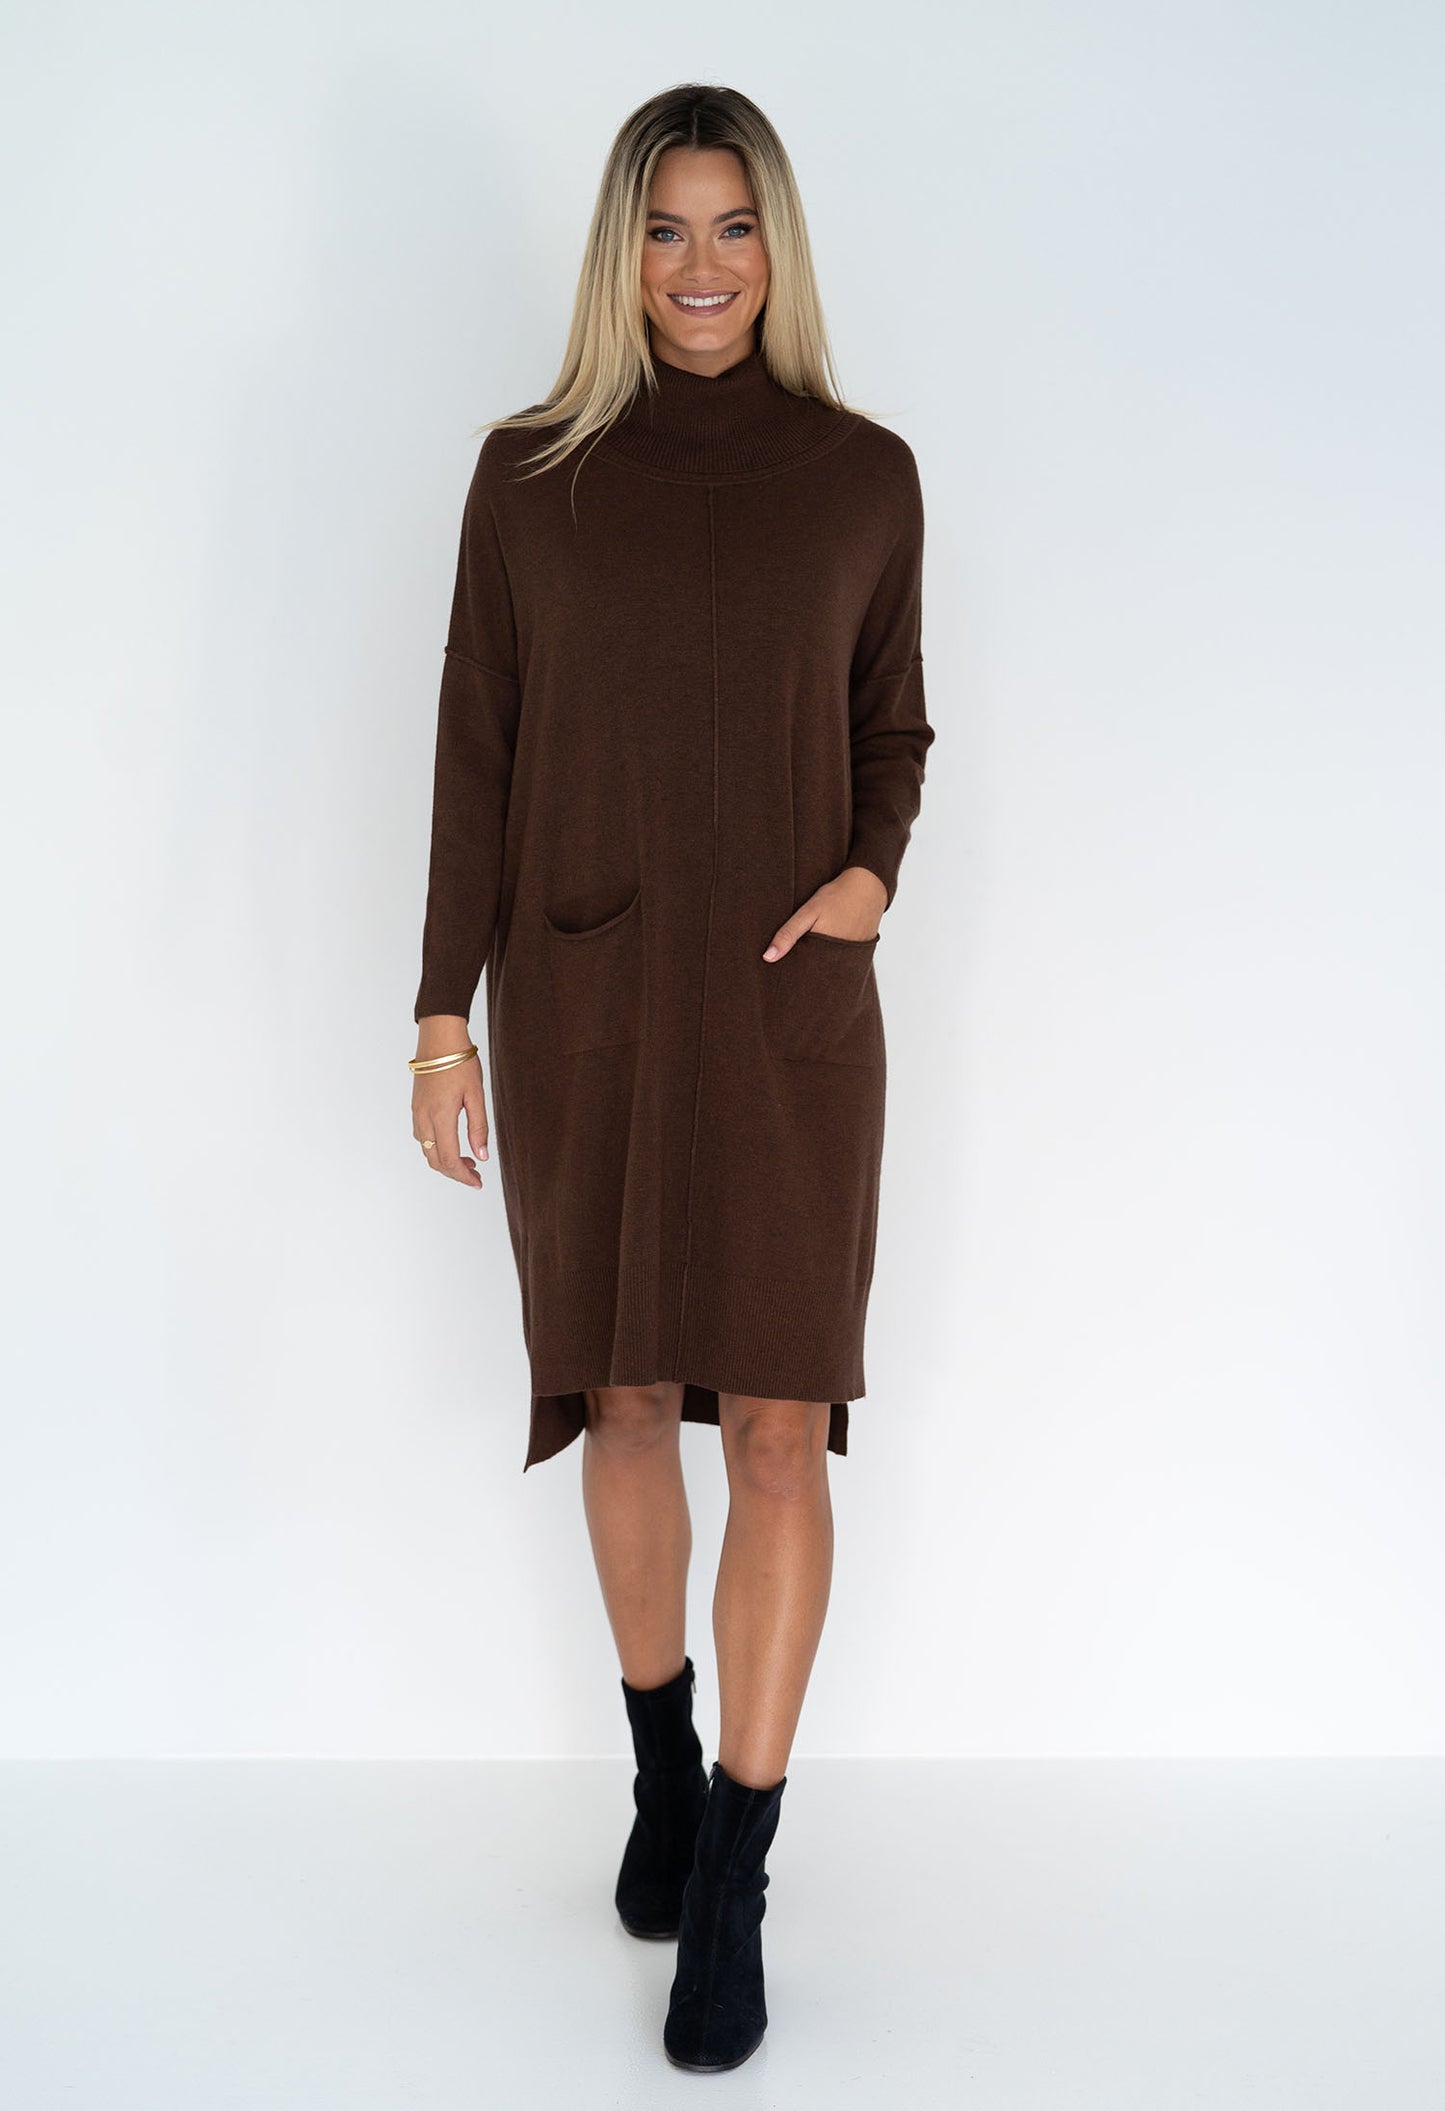 Humidity - Myra Knitted Long Sleeve Winter Dress in Chocolate and Black.